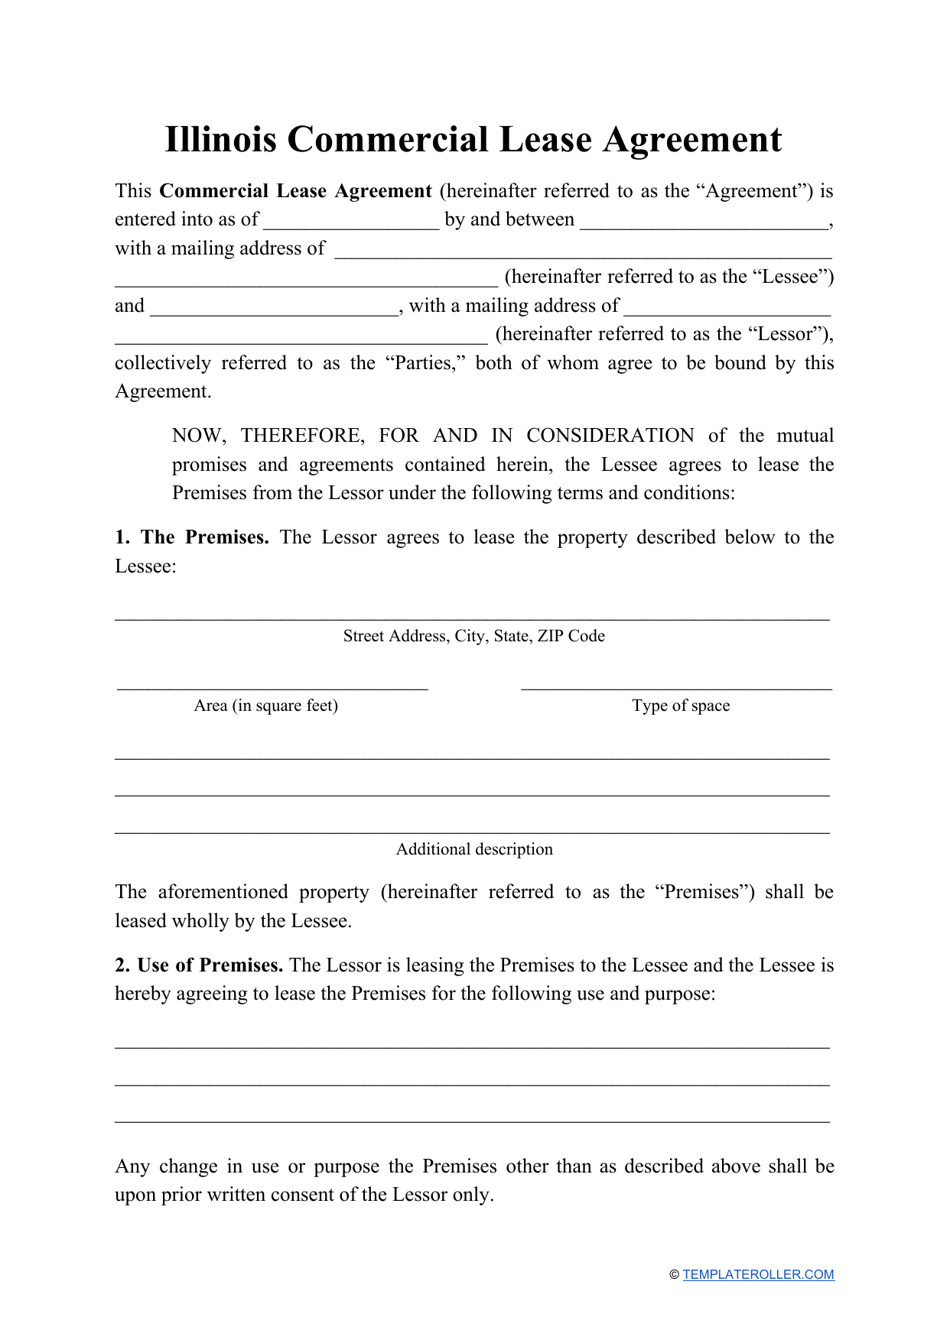 Illinois Commercial Lease Agreement Template Download Printable For free printable commercial lease agreement template